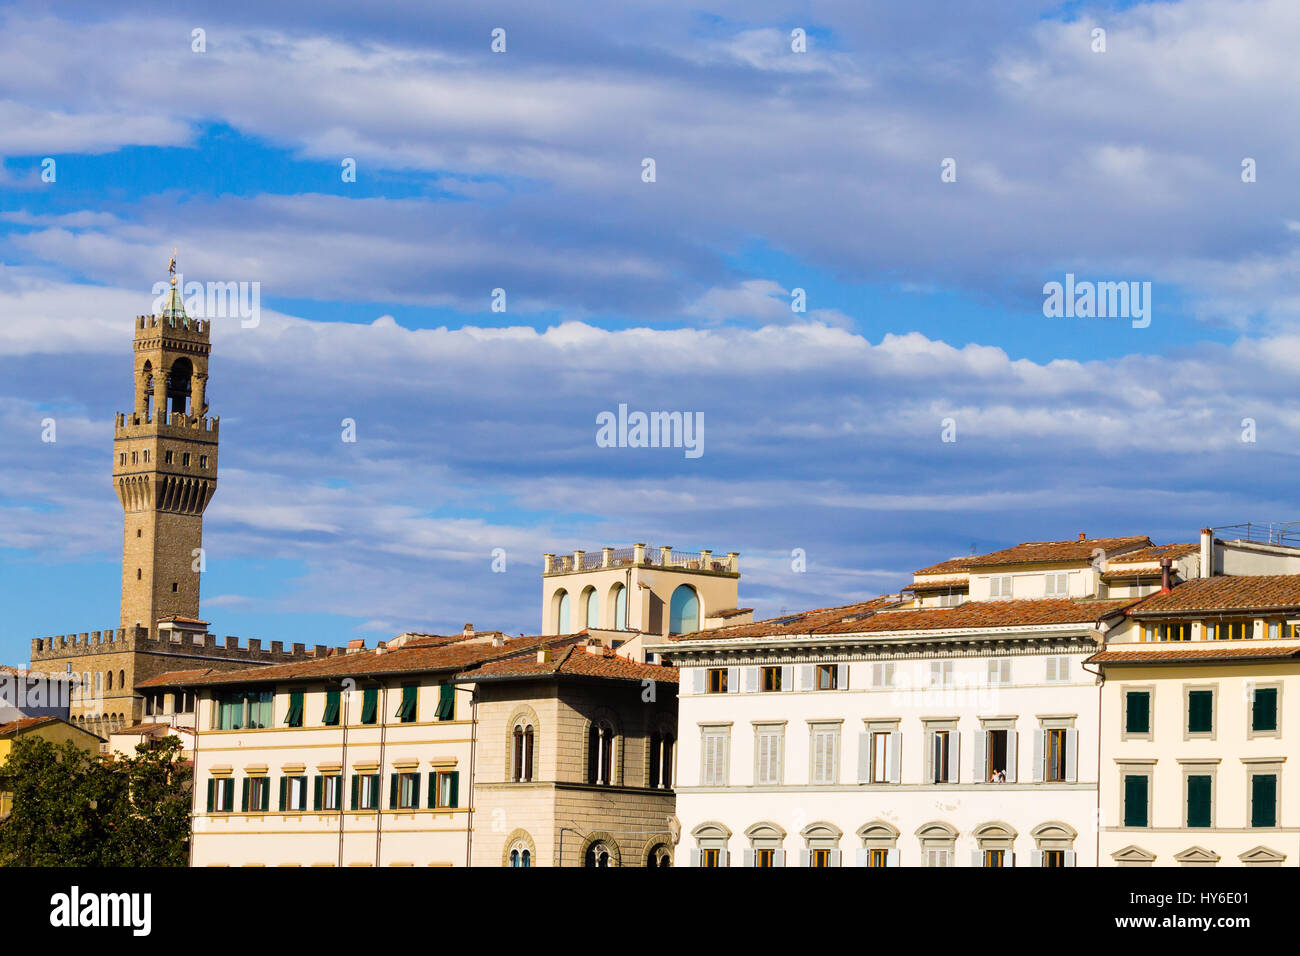 Old Palace bell tower detail view, Florence, Italian panorama. Palazzo vecchio bell tower Stock Photo